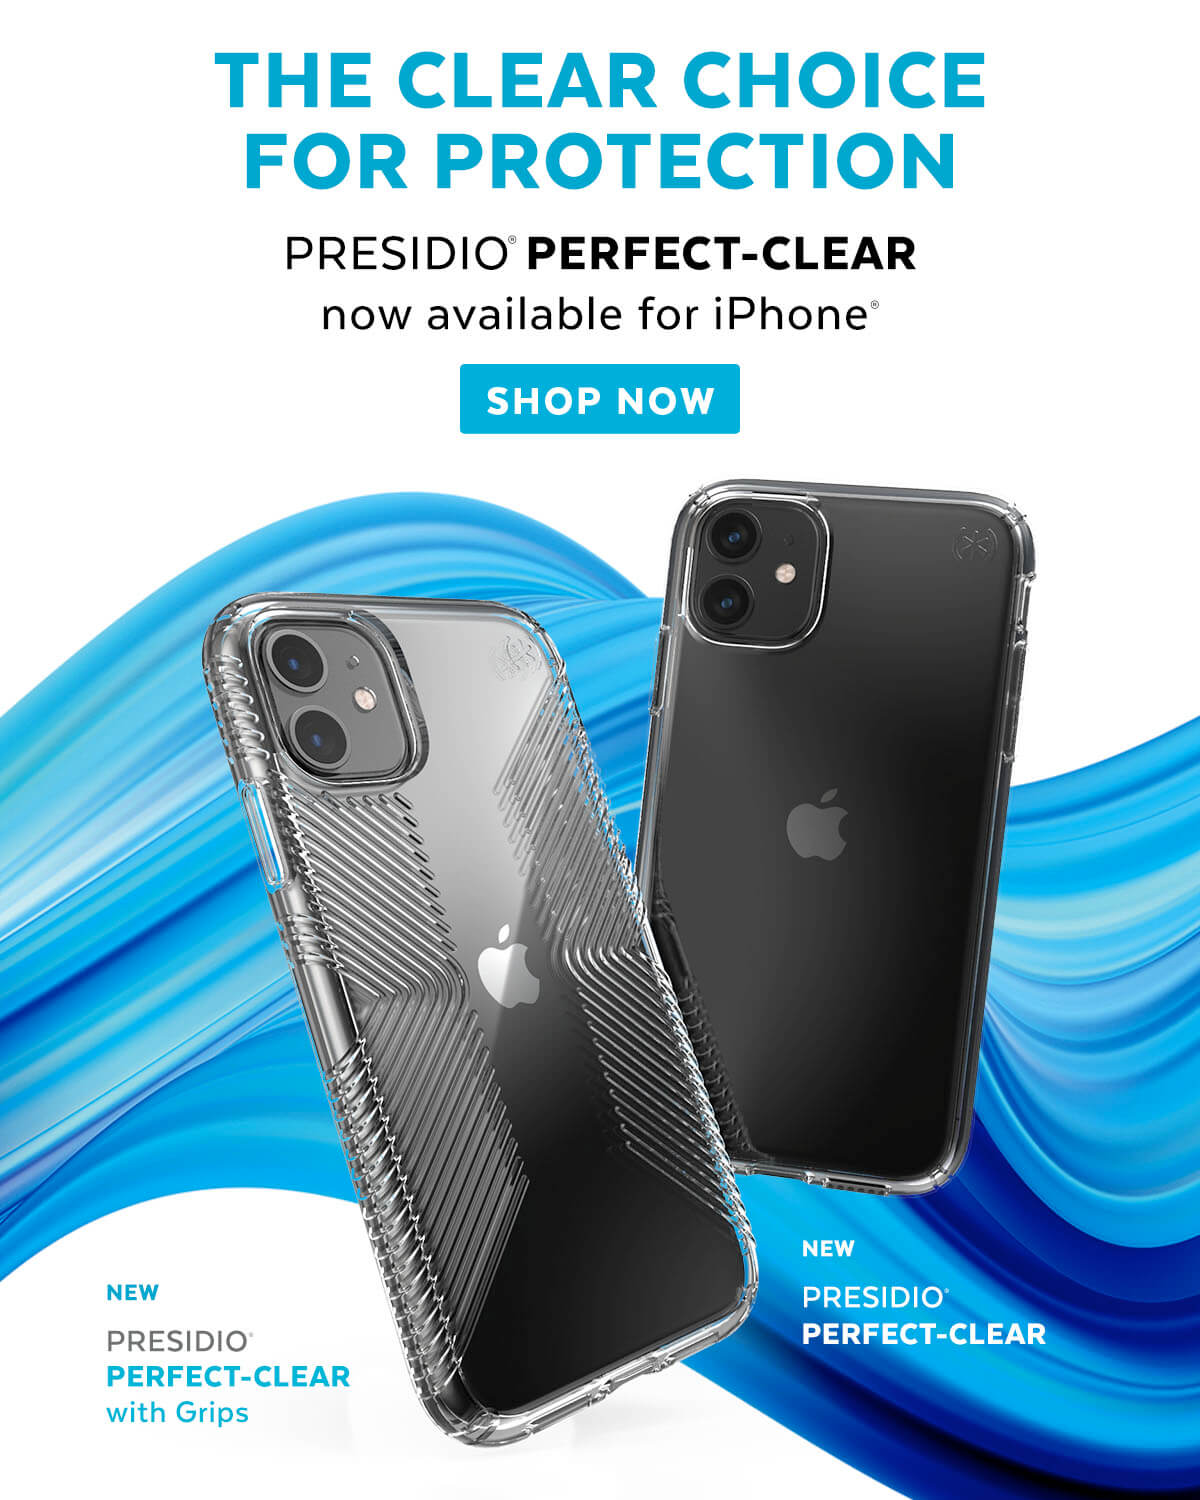 The Clear Choice for Protection. Presidio Perfect-Clear now available for iPhone. Shop now.